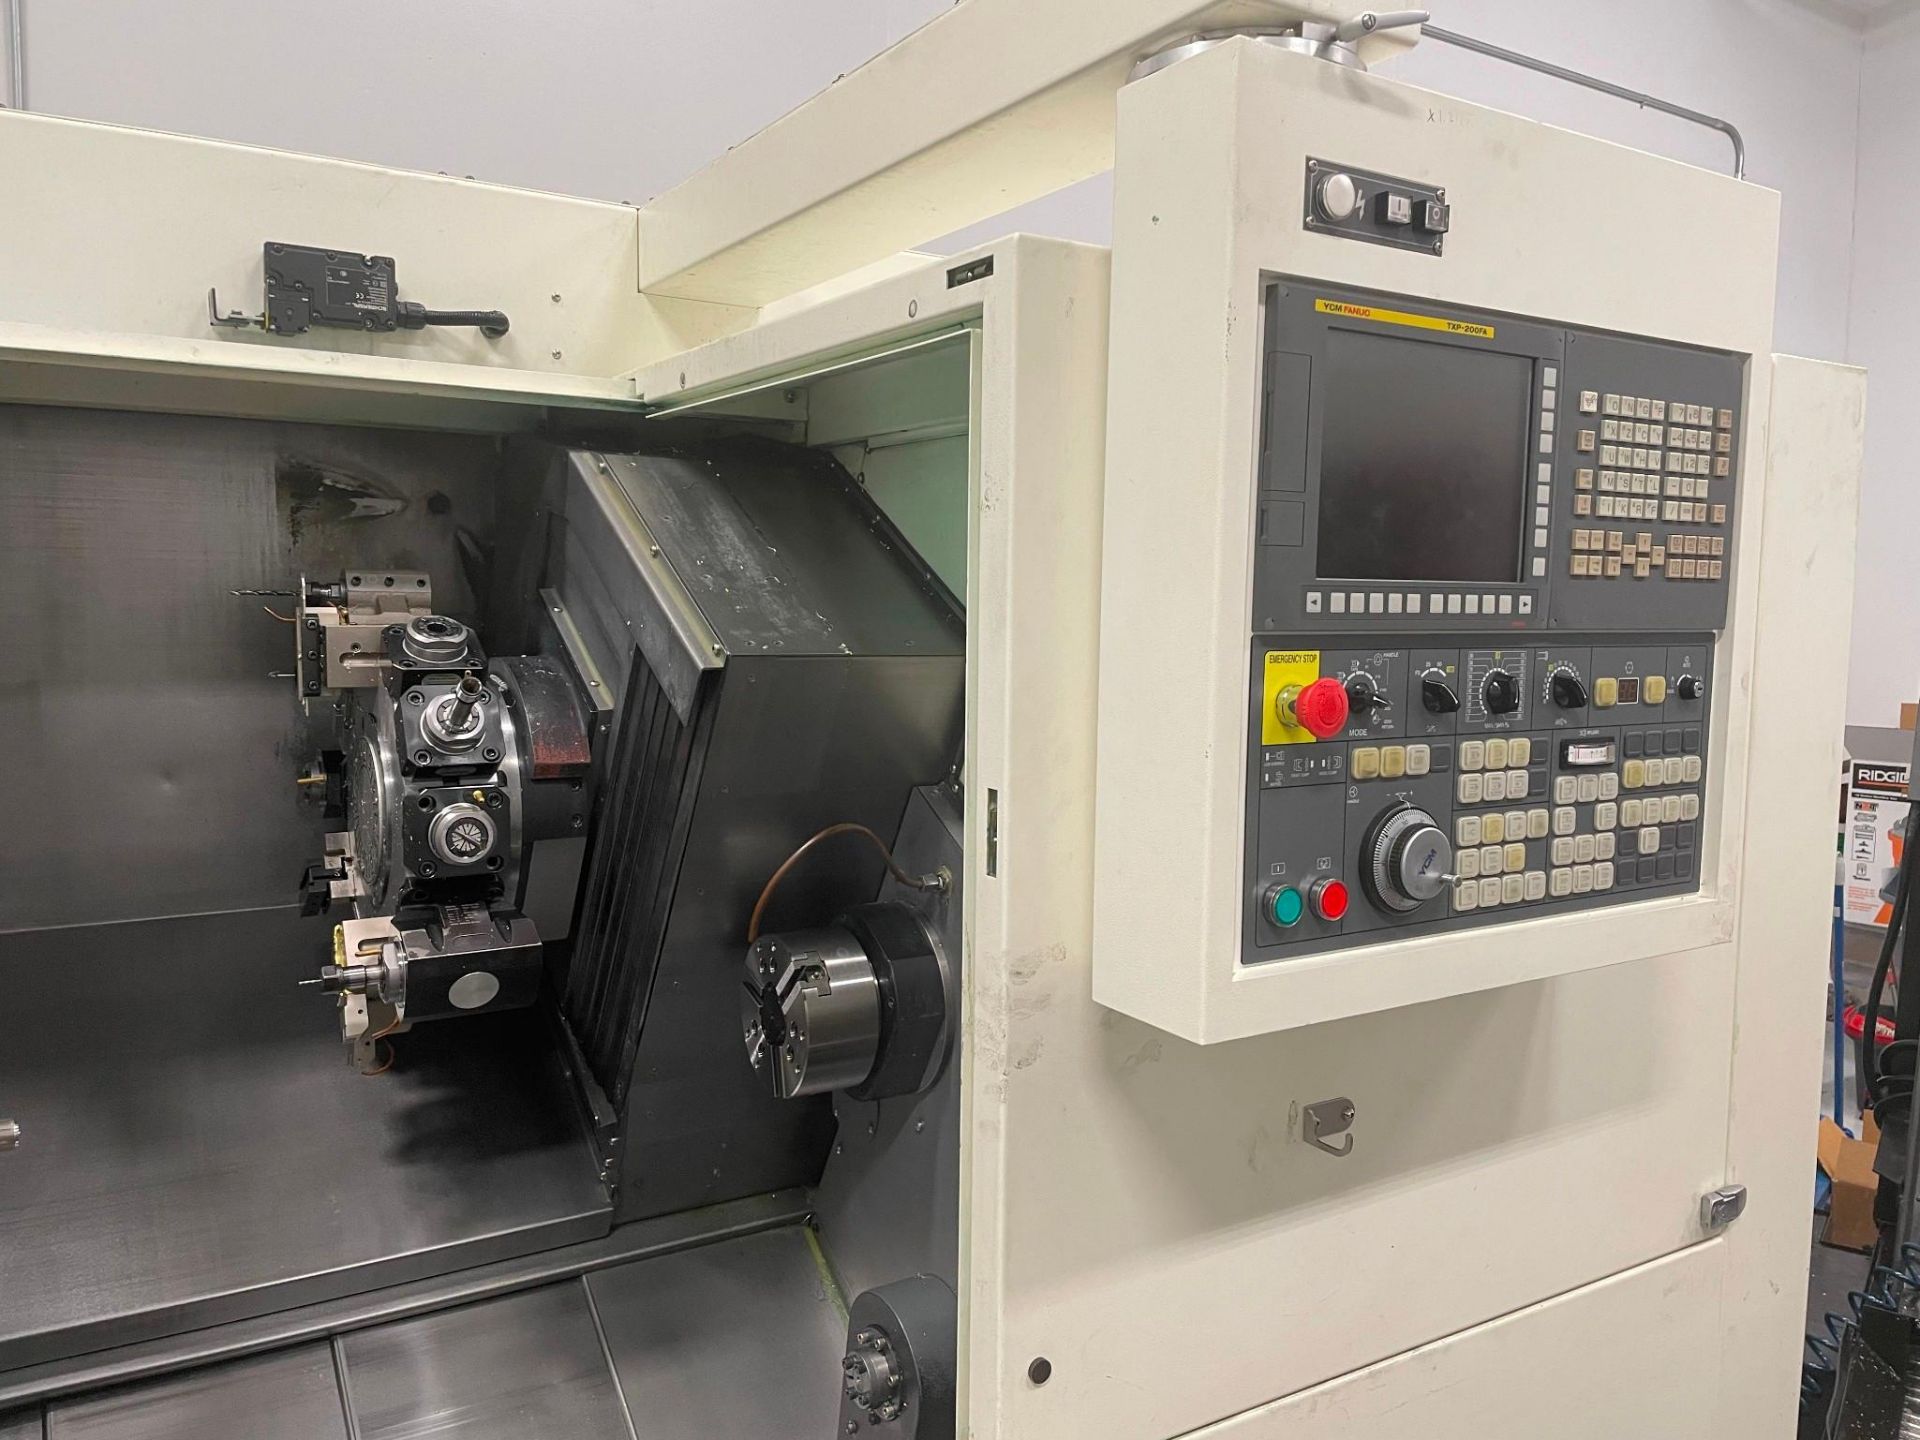 YCM NTC-1600LSY CNC LATHE, 2017 - DUAL SPINDLE, LIVE TOOLING, POLYGON TURNING, FANUC CONTROL - Image 4 of 8